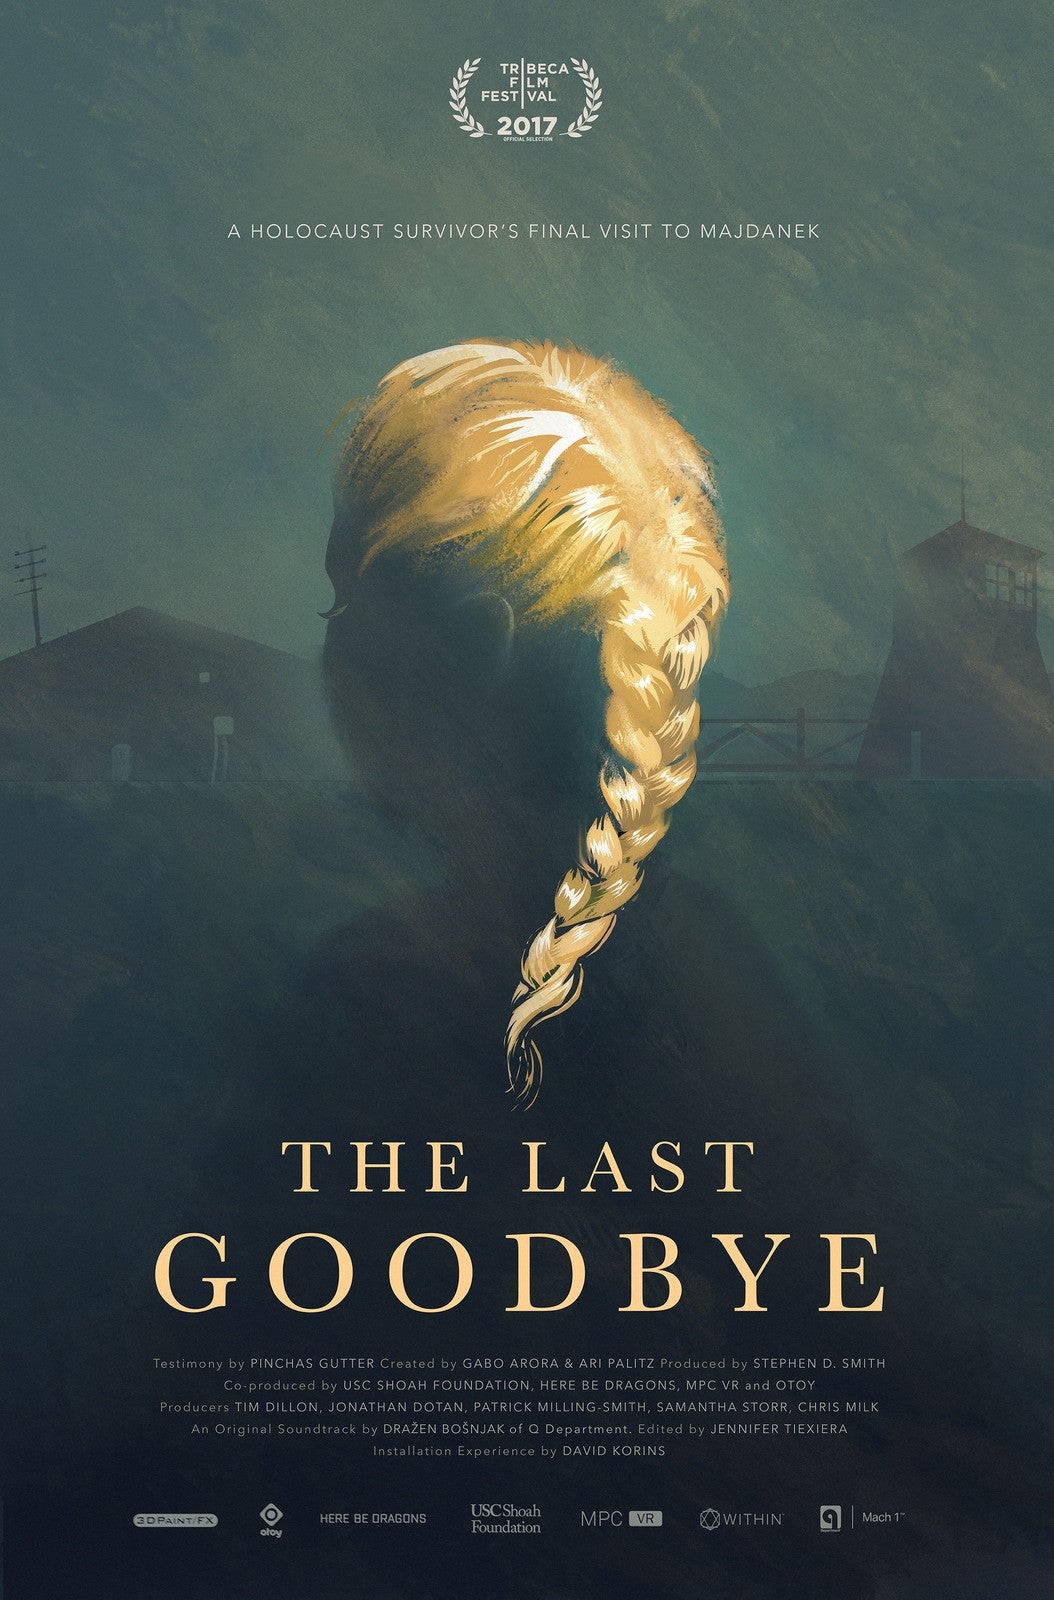 Remembering the Holocaust: The Last Goodbye film poster